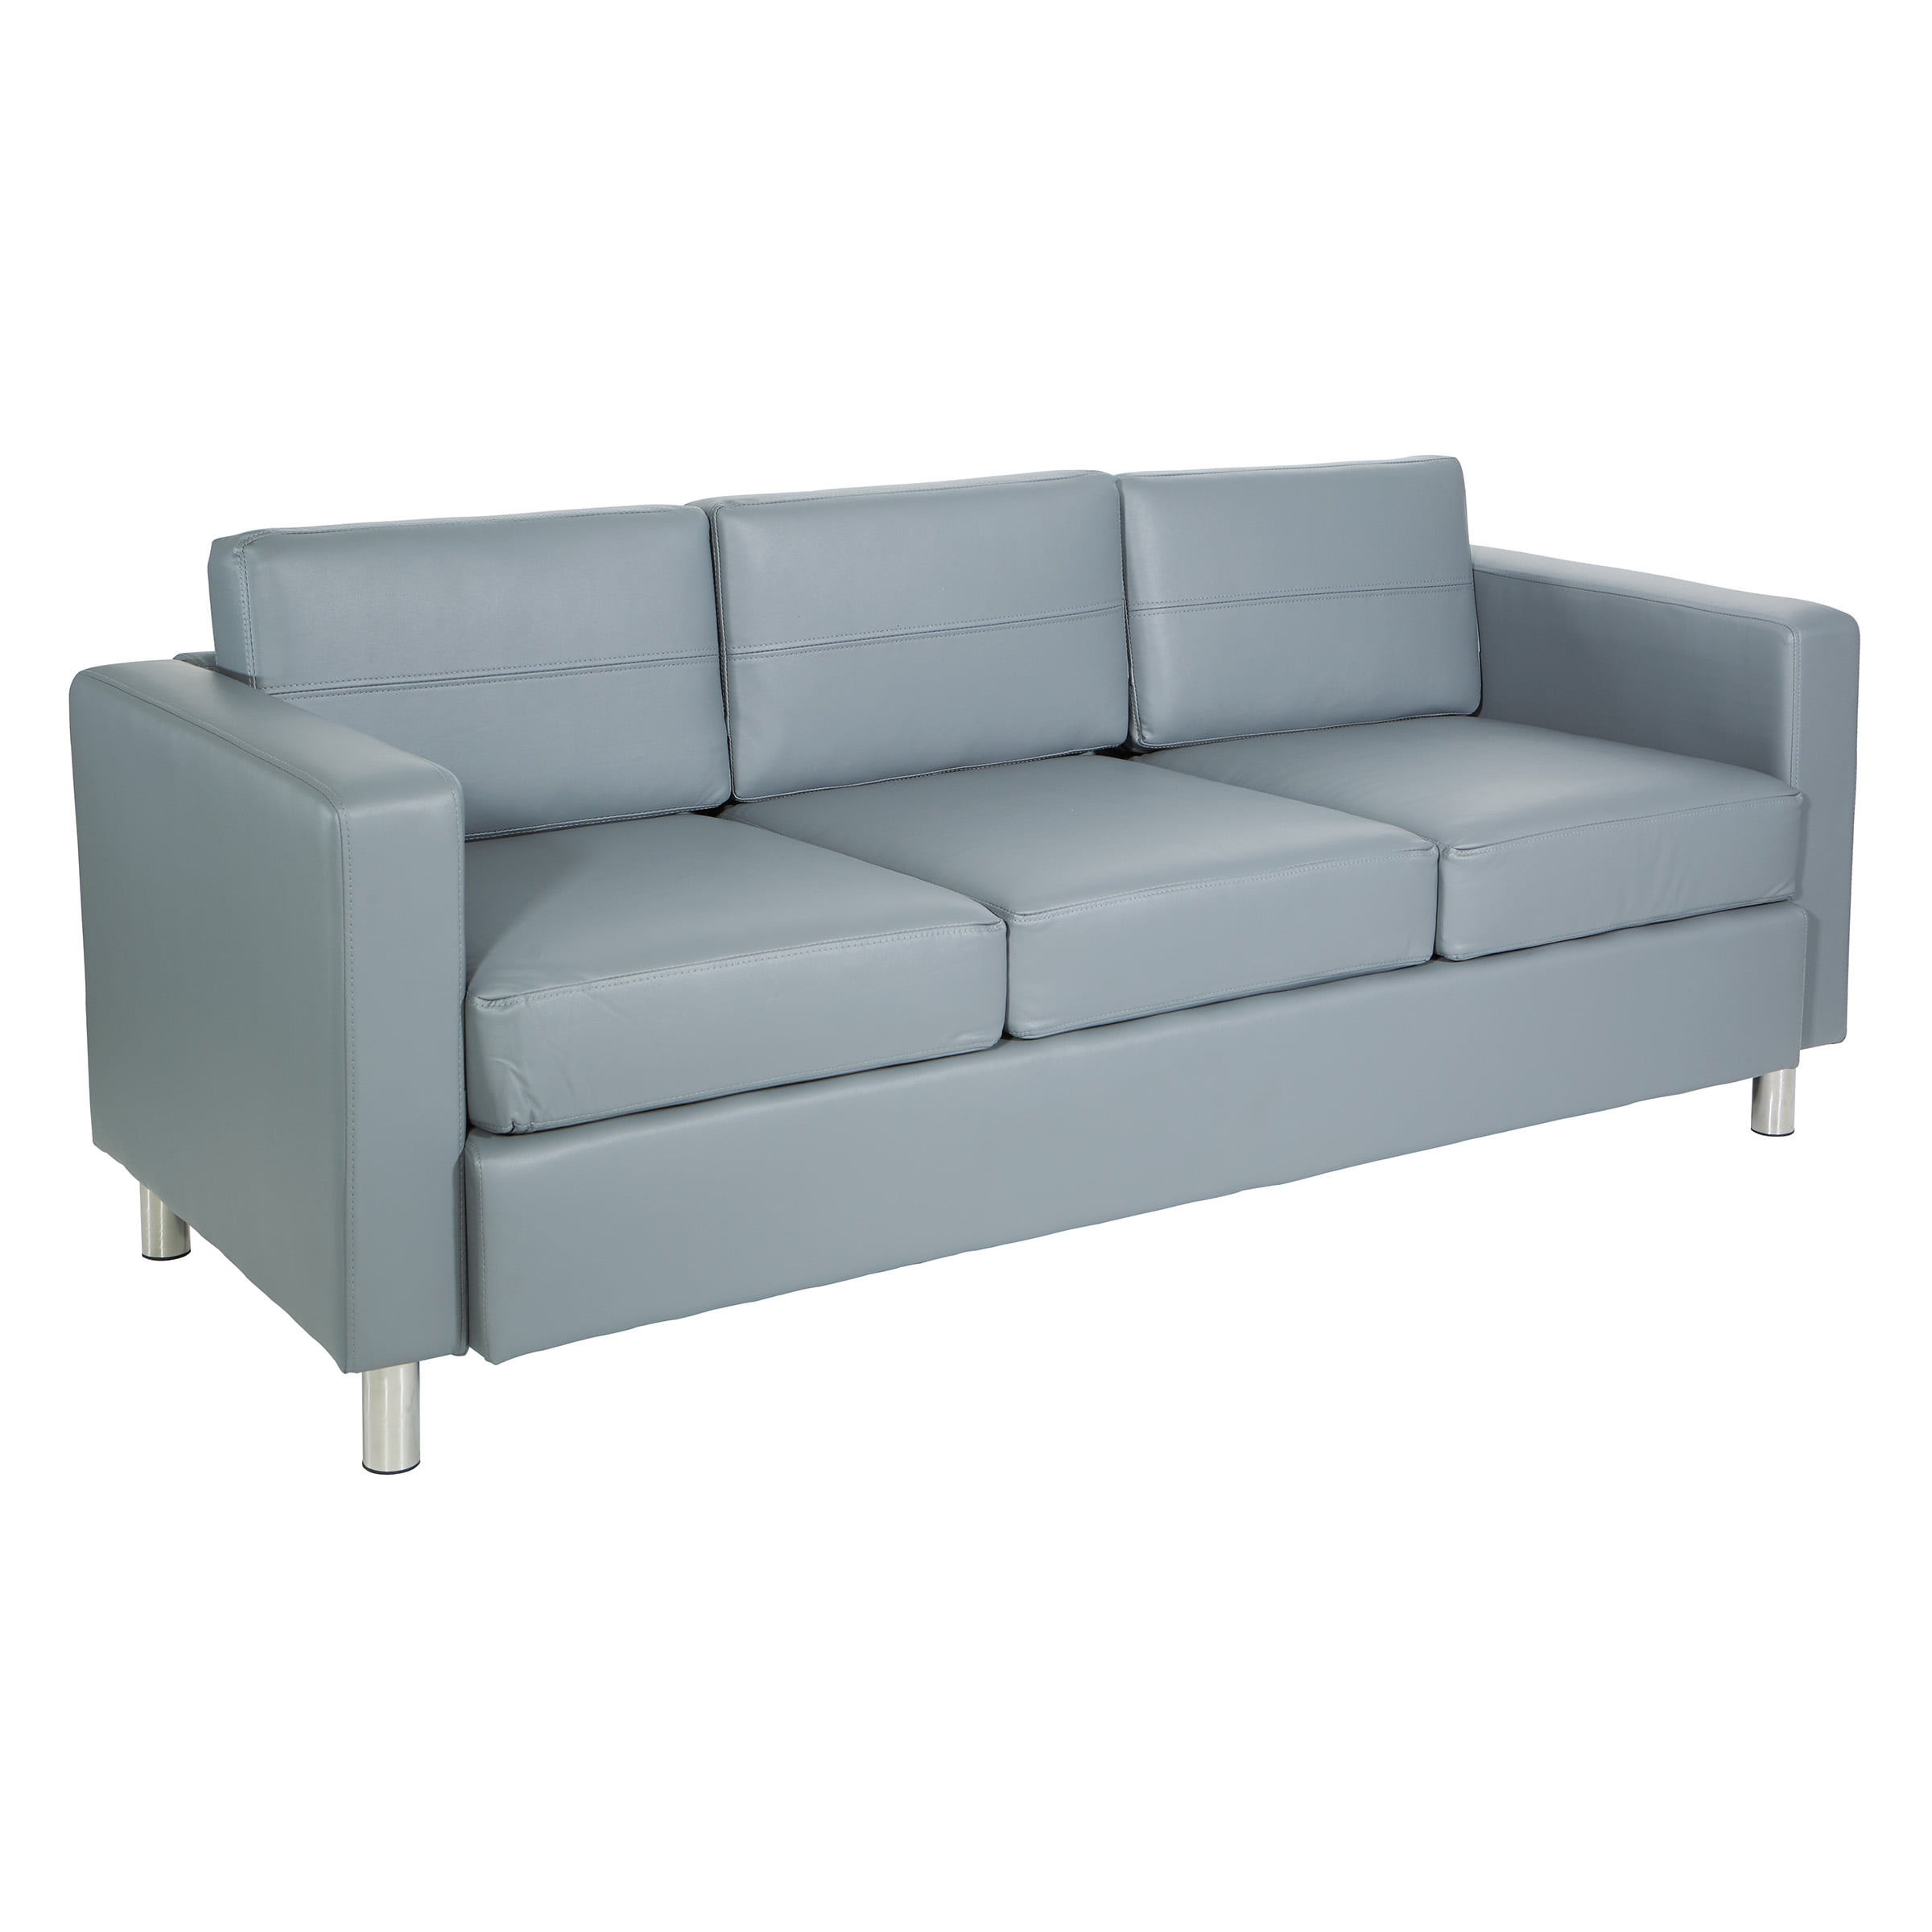 OSP Home Furnishings Pacific Sofa Couch in Charcoal Grey Faux Leather with  Box Spring Seats and Silver Color Legs